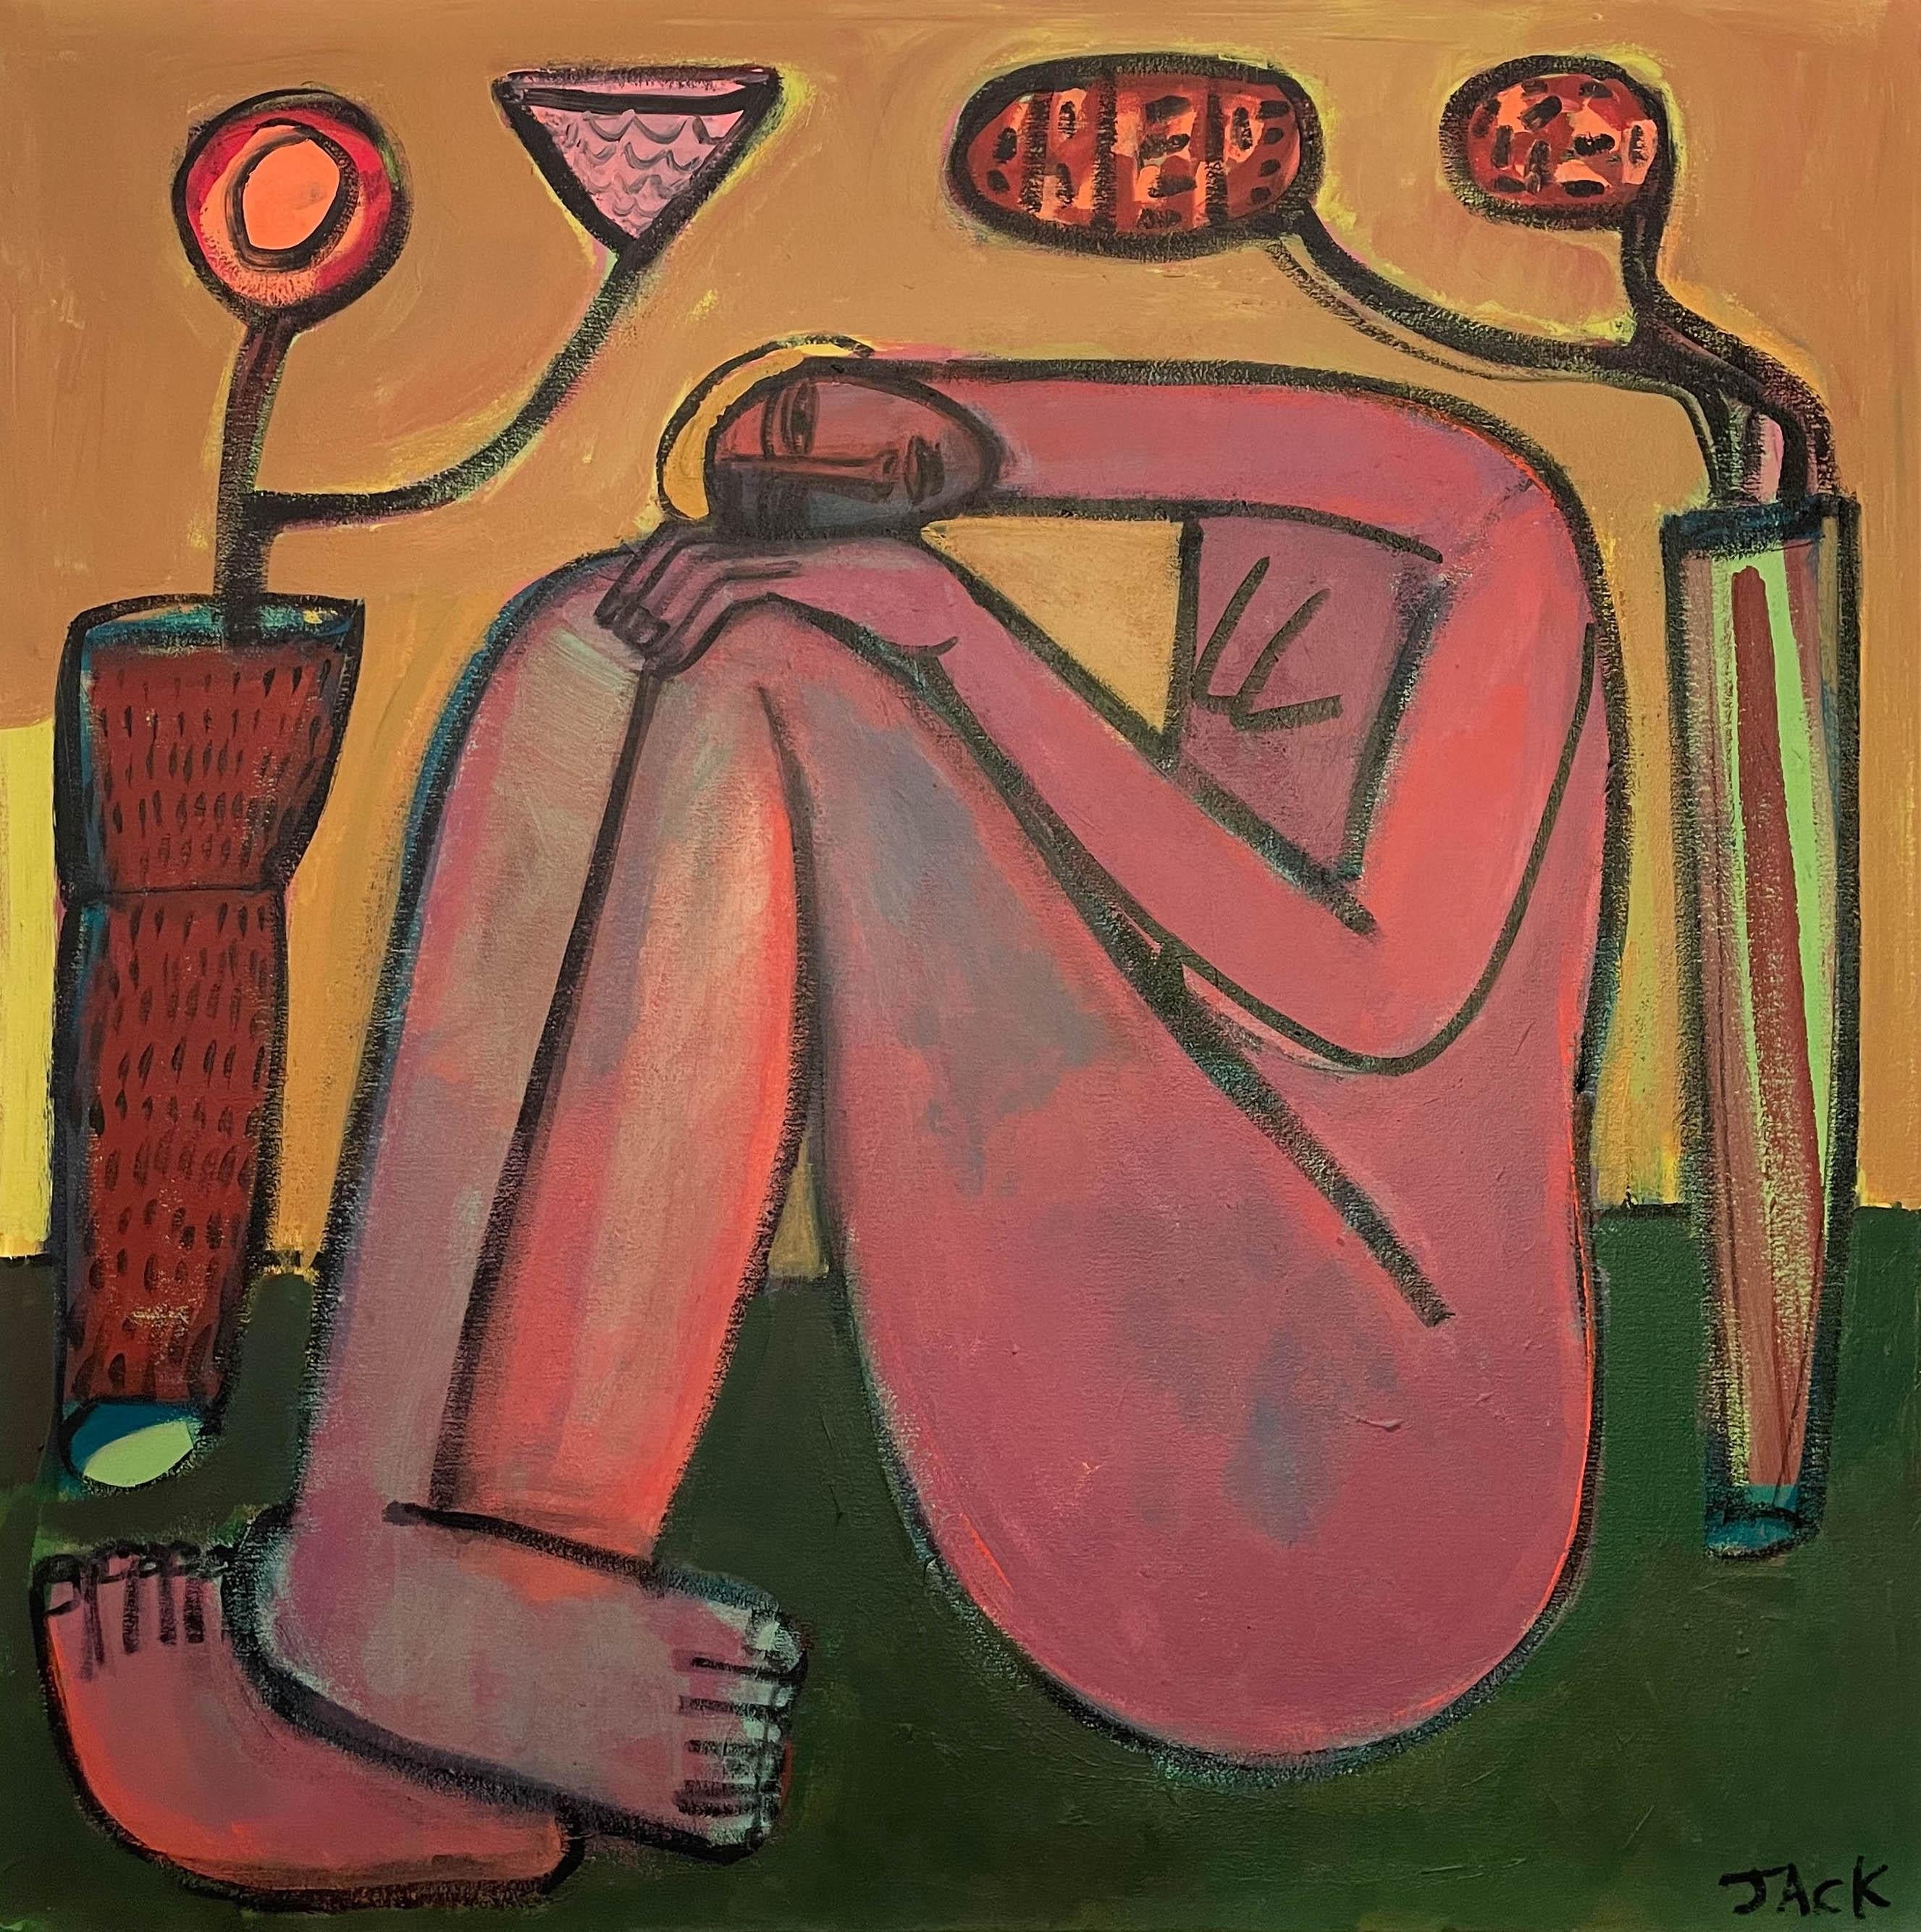 Rebecca Jack
"Banou"
Oil & Acrylic on Canvas
40 x 40 in.  
41.25 x 41.25 in. Framed 
__________________________

Rebecca Jack, an intuitive painter, creates vibrant, figurative works that highlight the beauty of imperfection through visible